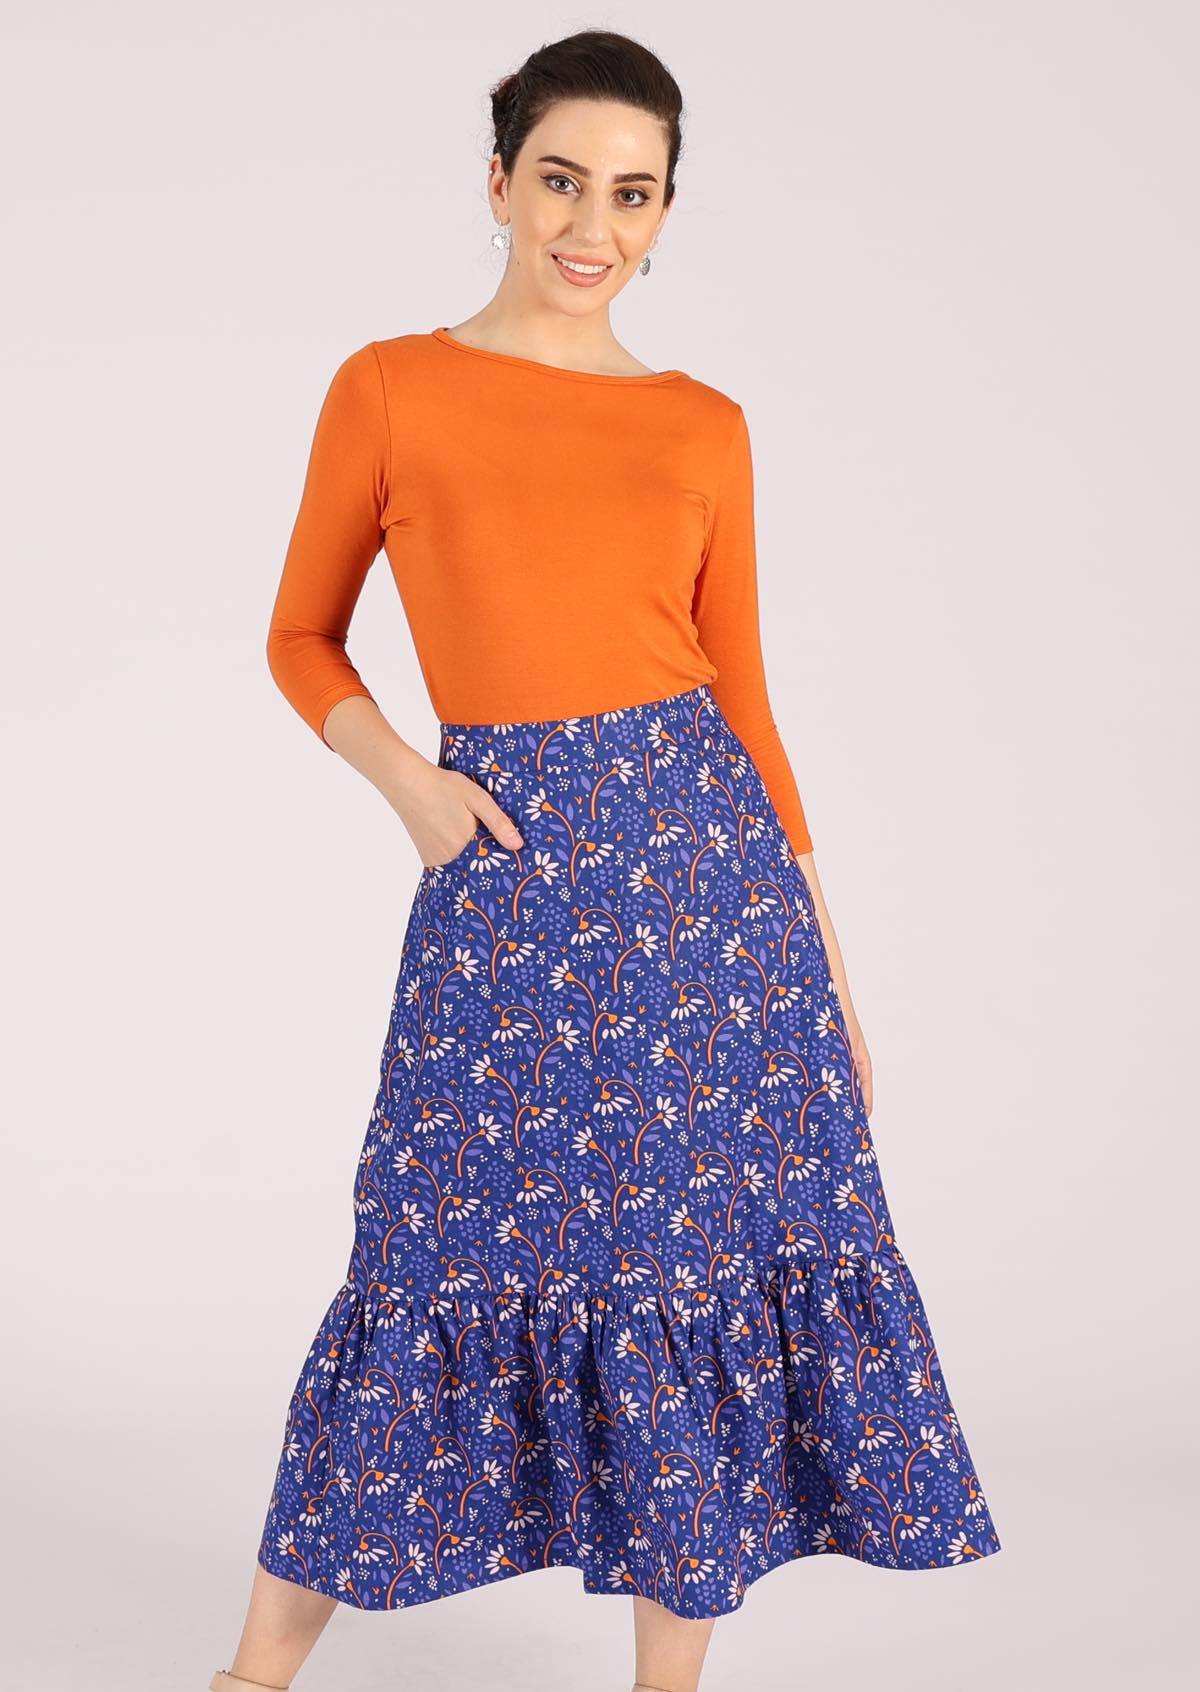 Model wears cotton retro skirt with large ruffle